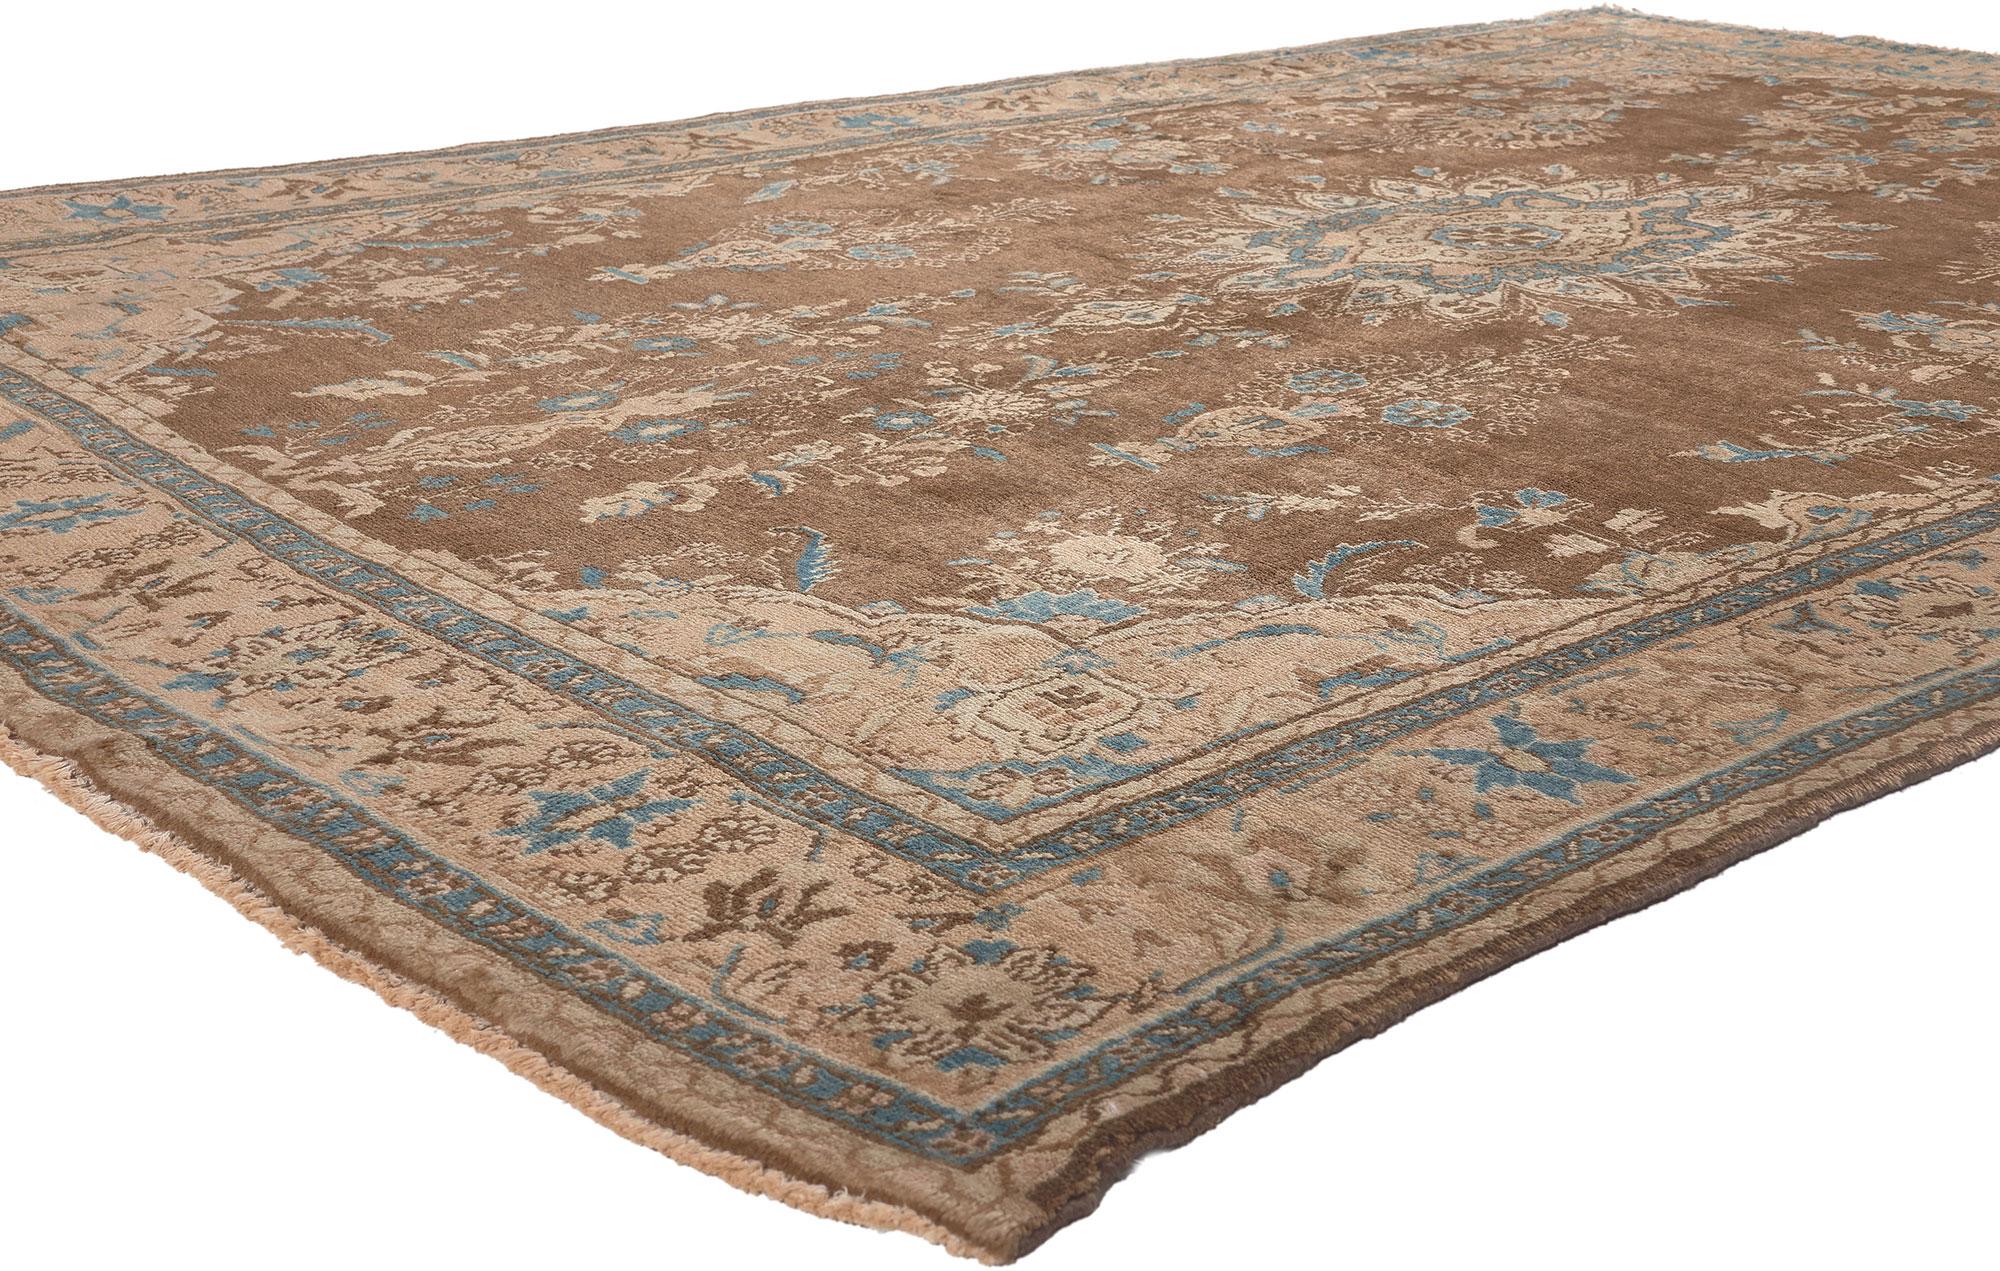 76088 Vintage Persian Hamadan Rug, 06'10 X 10'09.
Classic elegance meets nostalgic charm in this hand knotted wool vintage Persian Hamadan rug. The American Sarouk floral design and cozy earth-tone colors woven into this piece work together